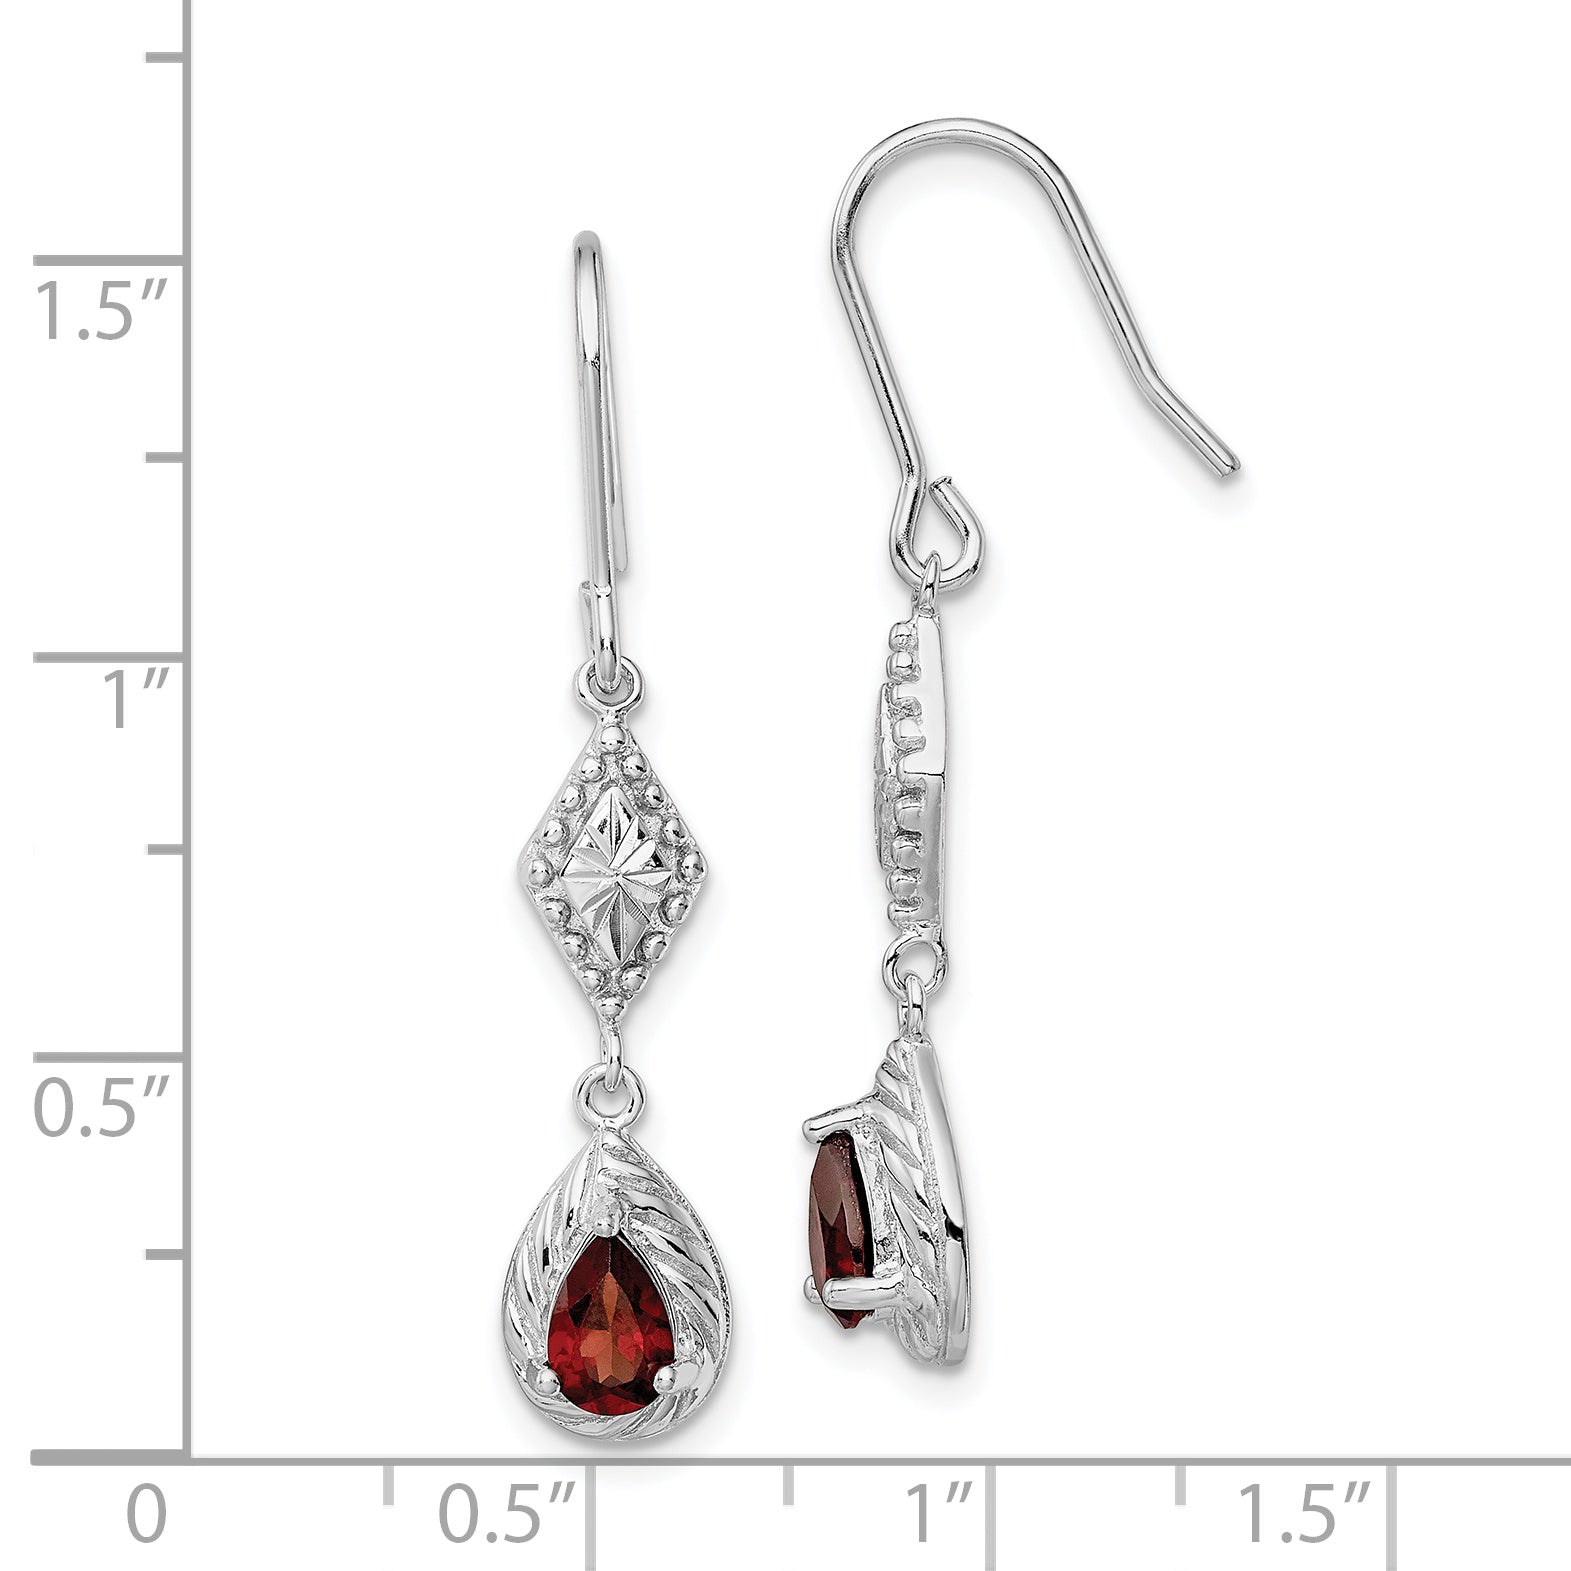 Sterling Silver Rhodium-plated Polished Diamond-cut & Textured Red CZ Teardrop Dangle Earrings